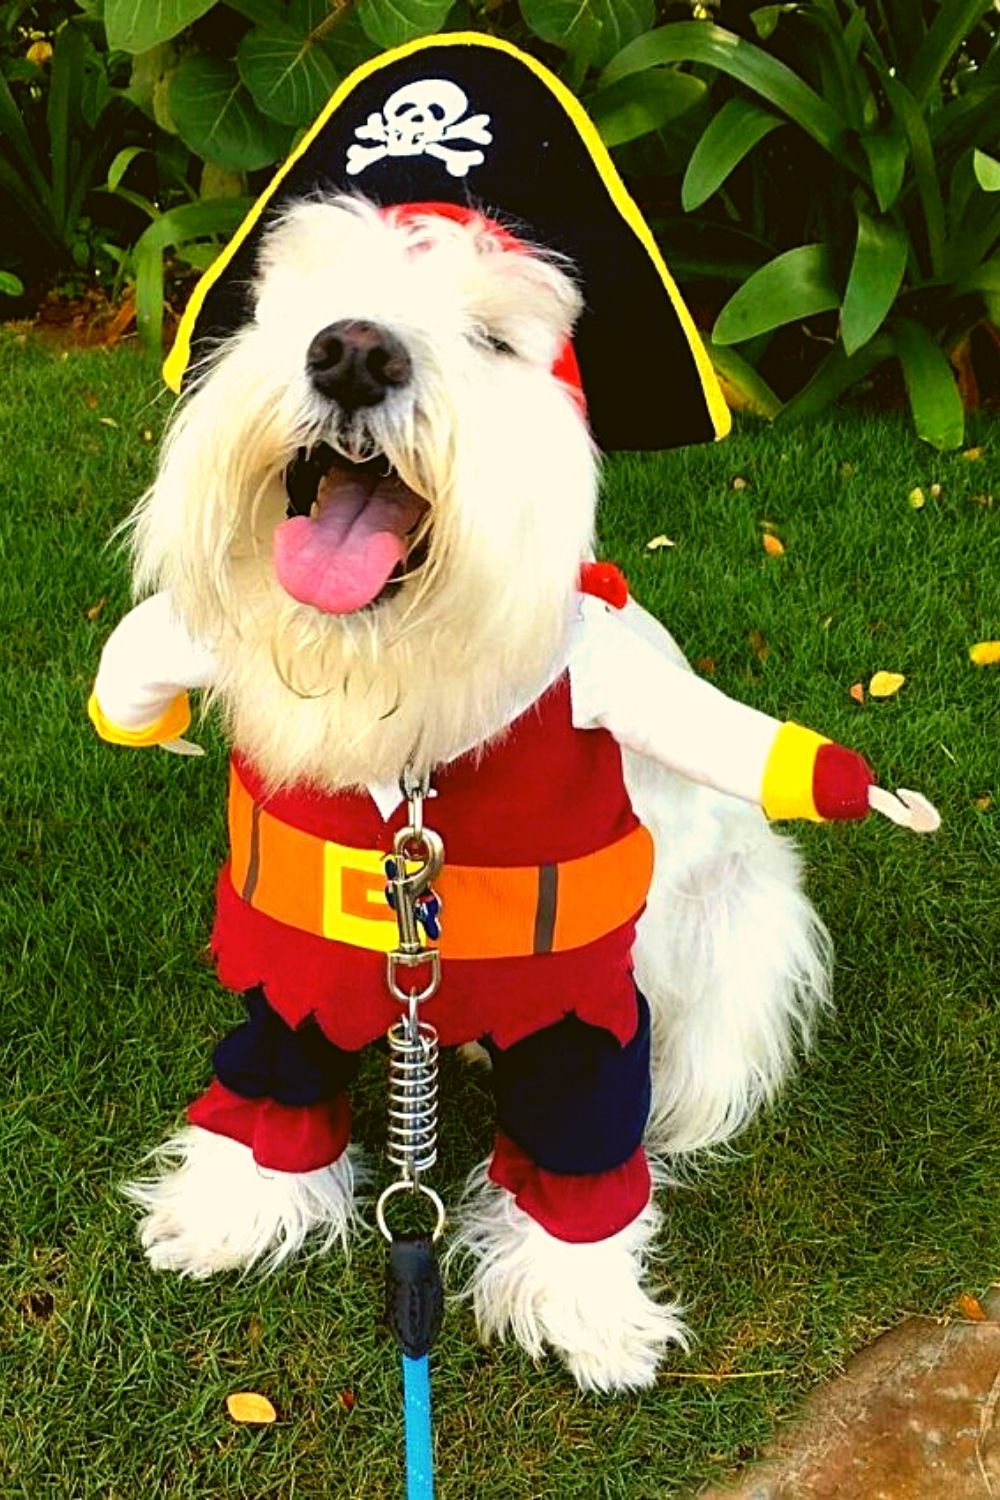 Pirate outfit for dog.